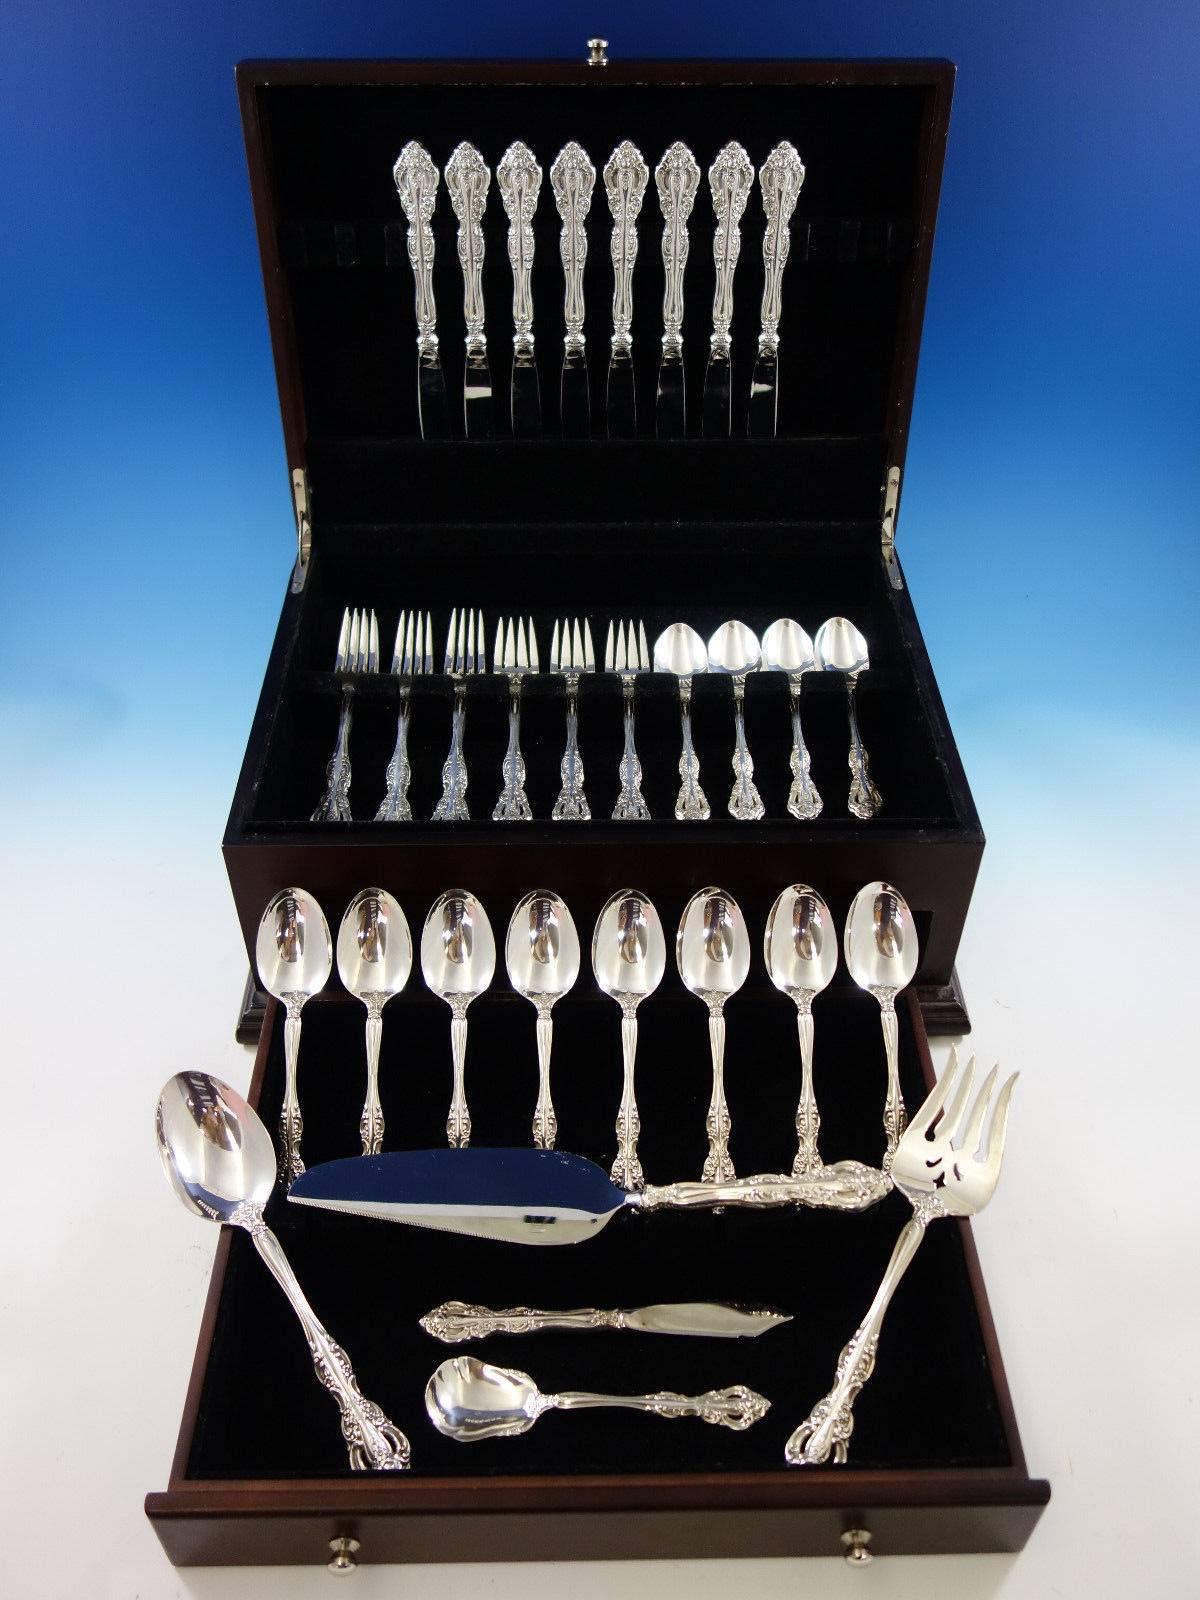 Eight knives 9", eight forks 7 1/4", eight salad forks 6 1/2",
eight teaspoons 6", eight place soup spoons 6 1/2",
one serving spoon 8 1/4", one cold meat fork 8 3/8",
one sugar spoon 6", one hollow handle